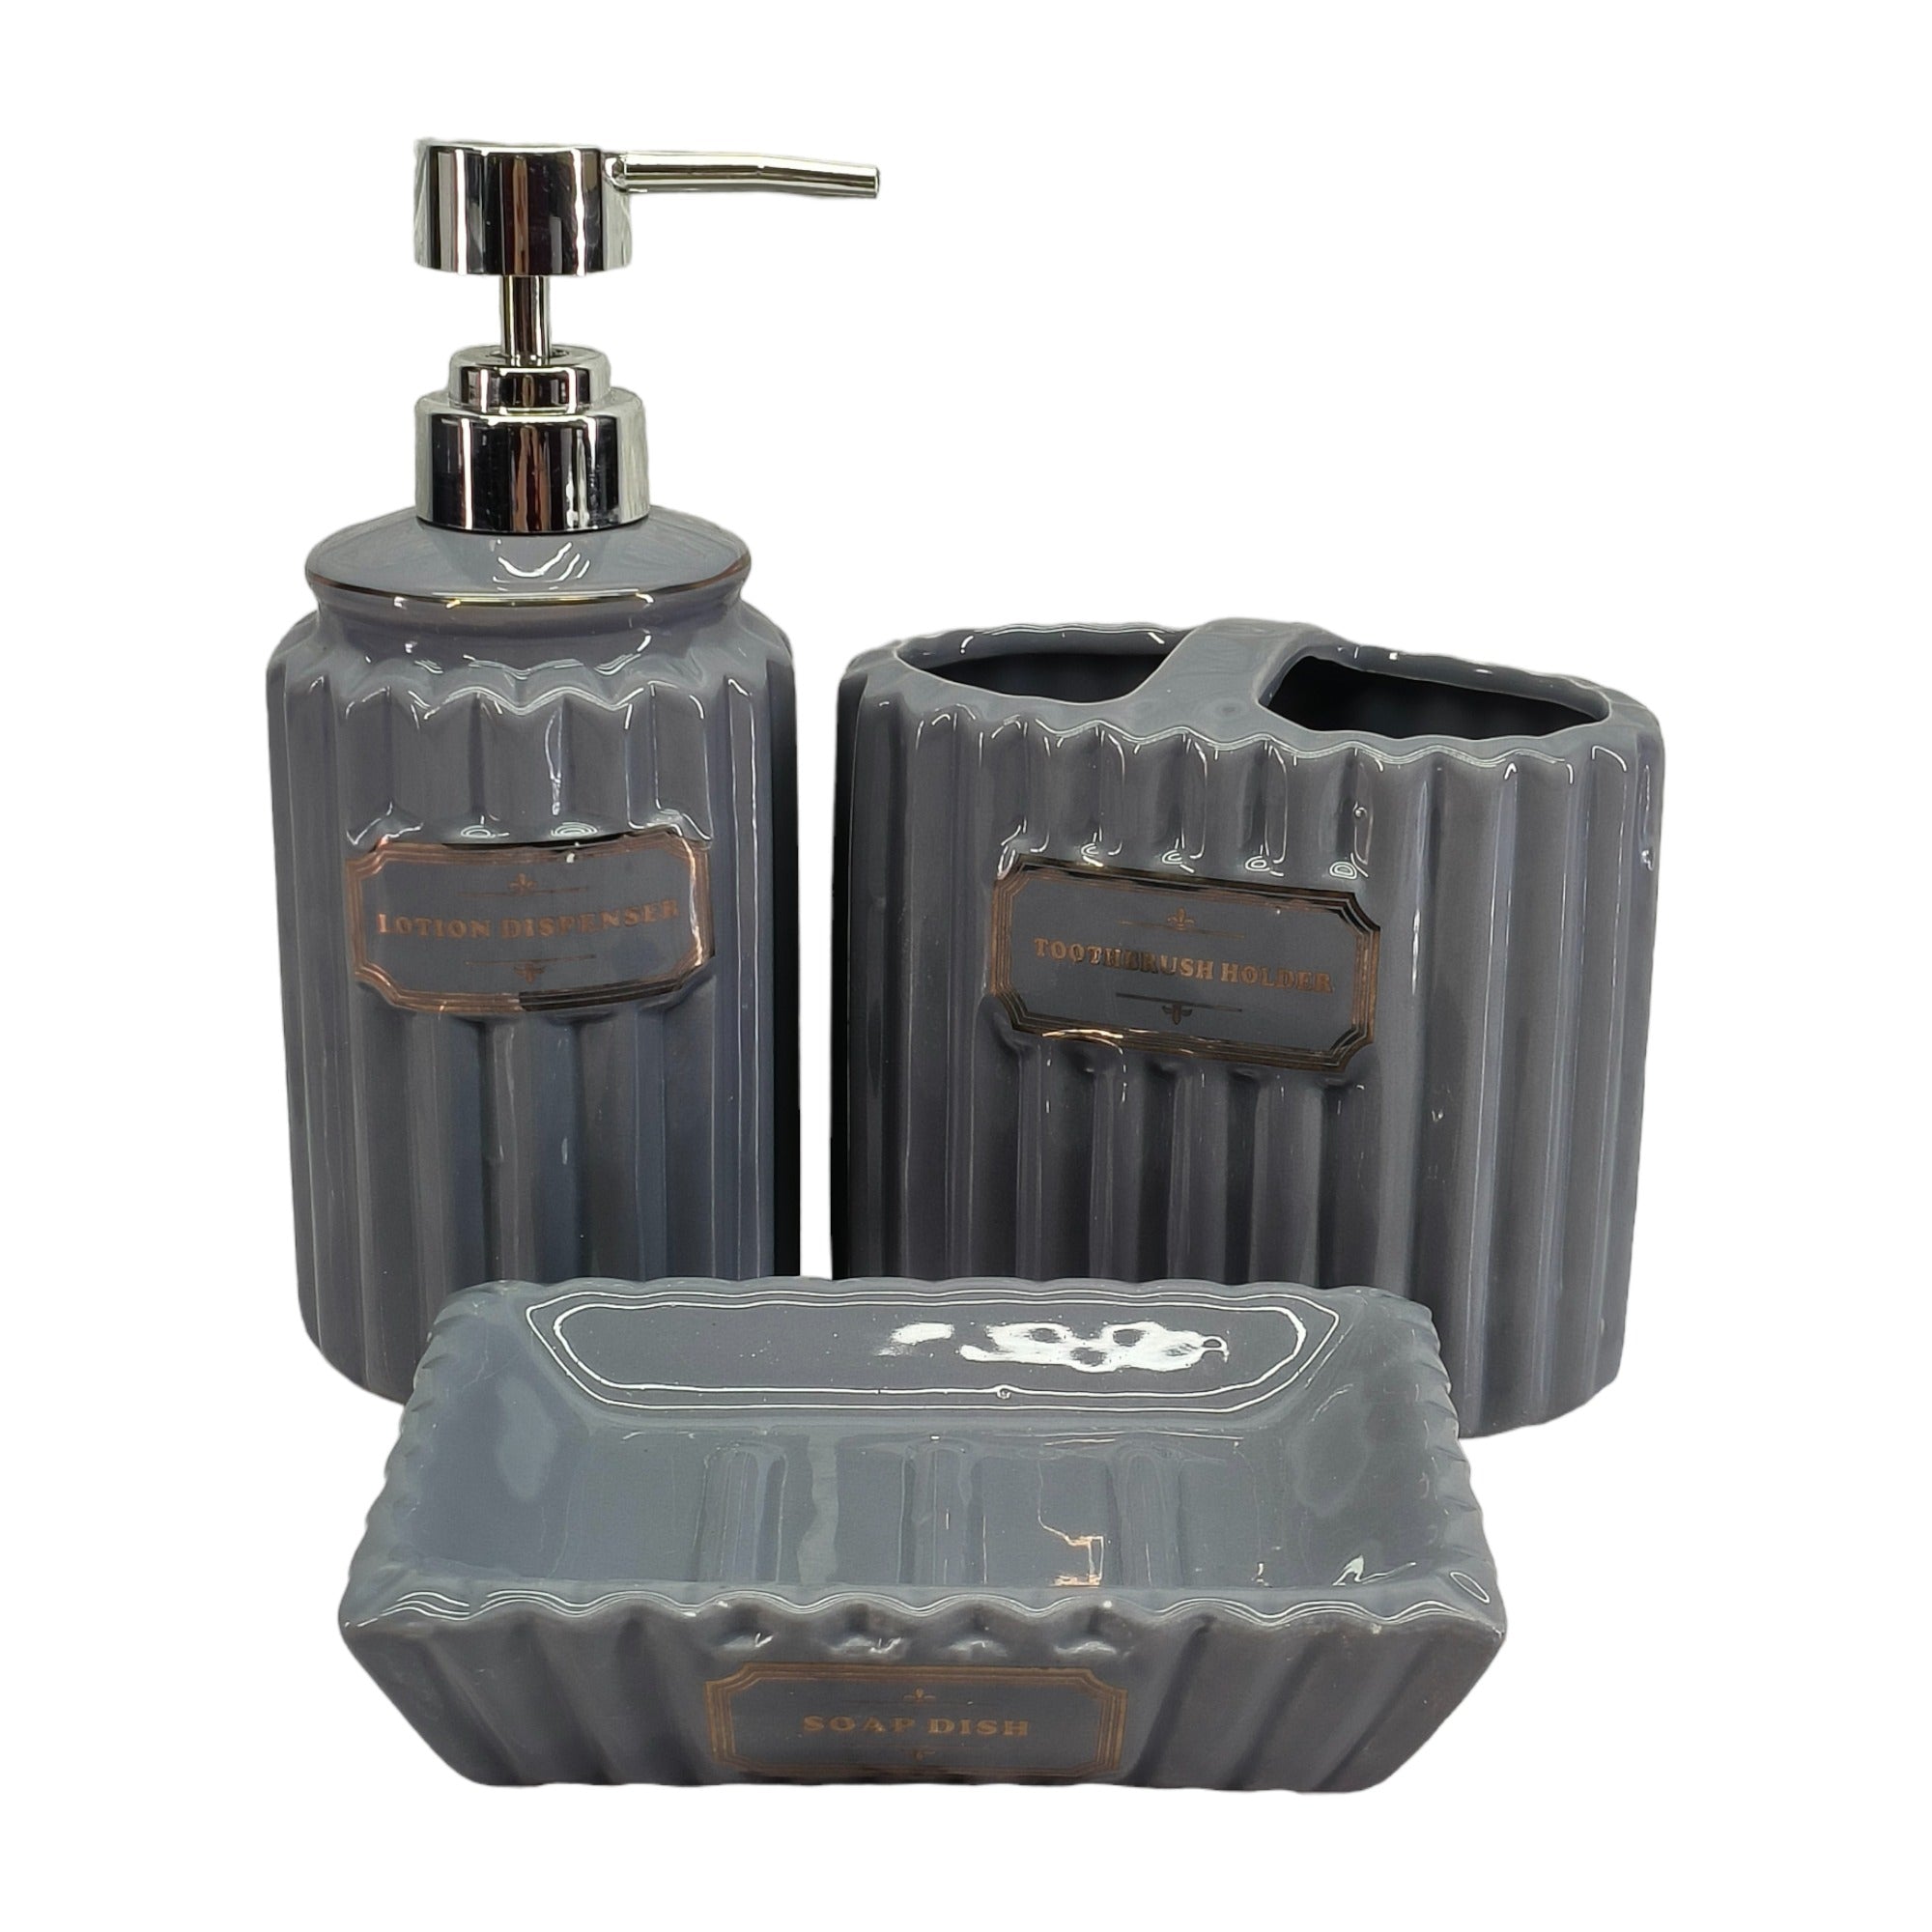 Ceramic Soap Dispenser Set with Toothbrush Holder and Soap Dish, Set of 3 Bathroom Accessories for Home (C3106)